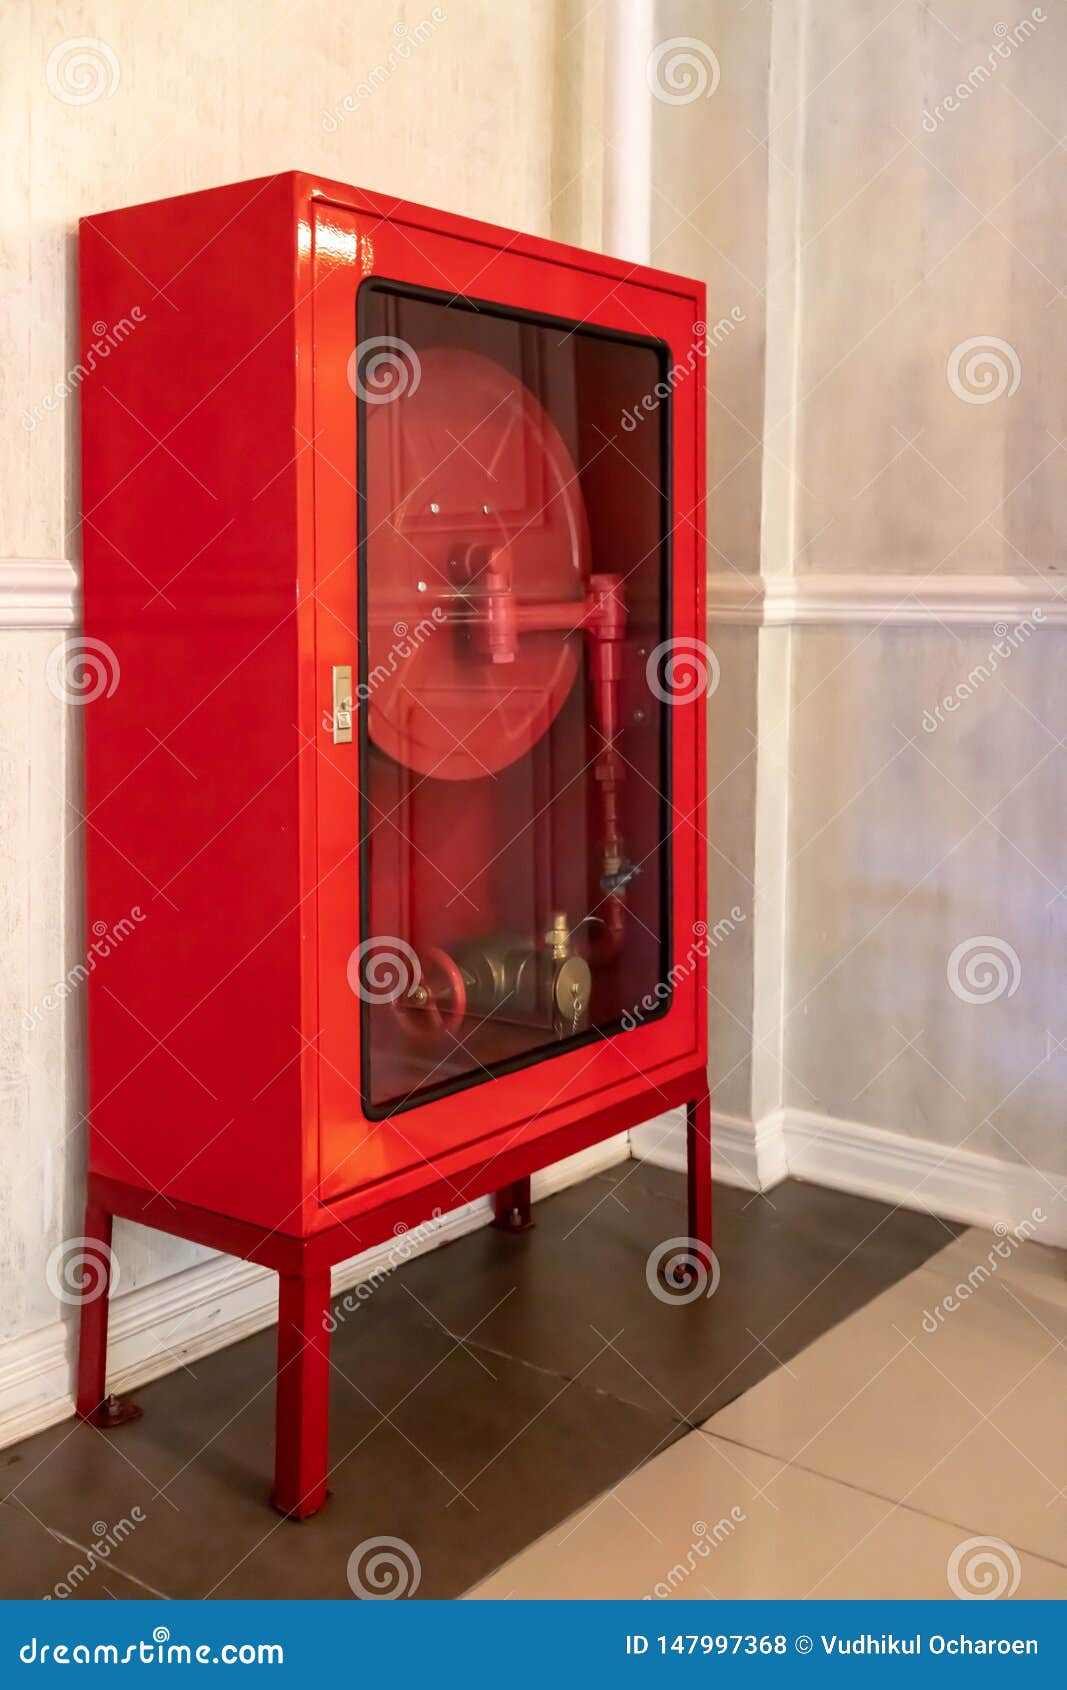 Red Fire Hose Cabinet On Brown Tile Floor Against White Wall Stock